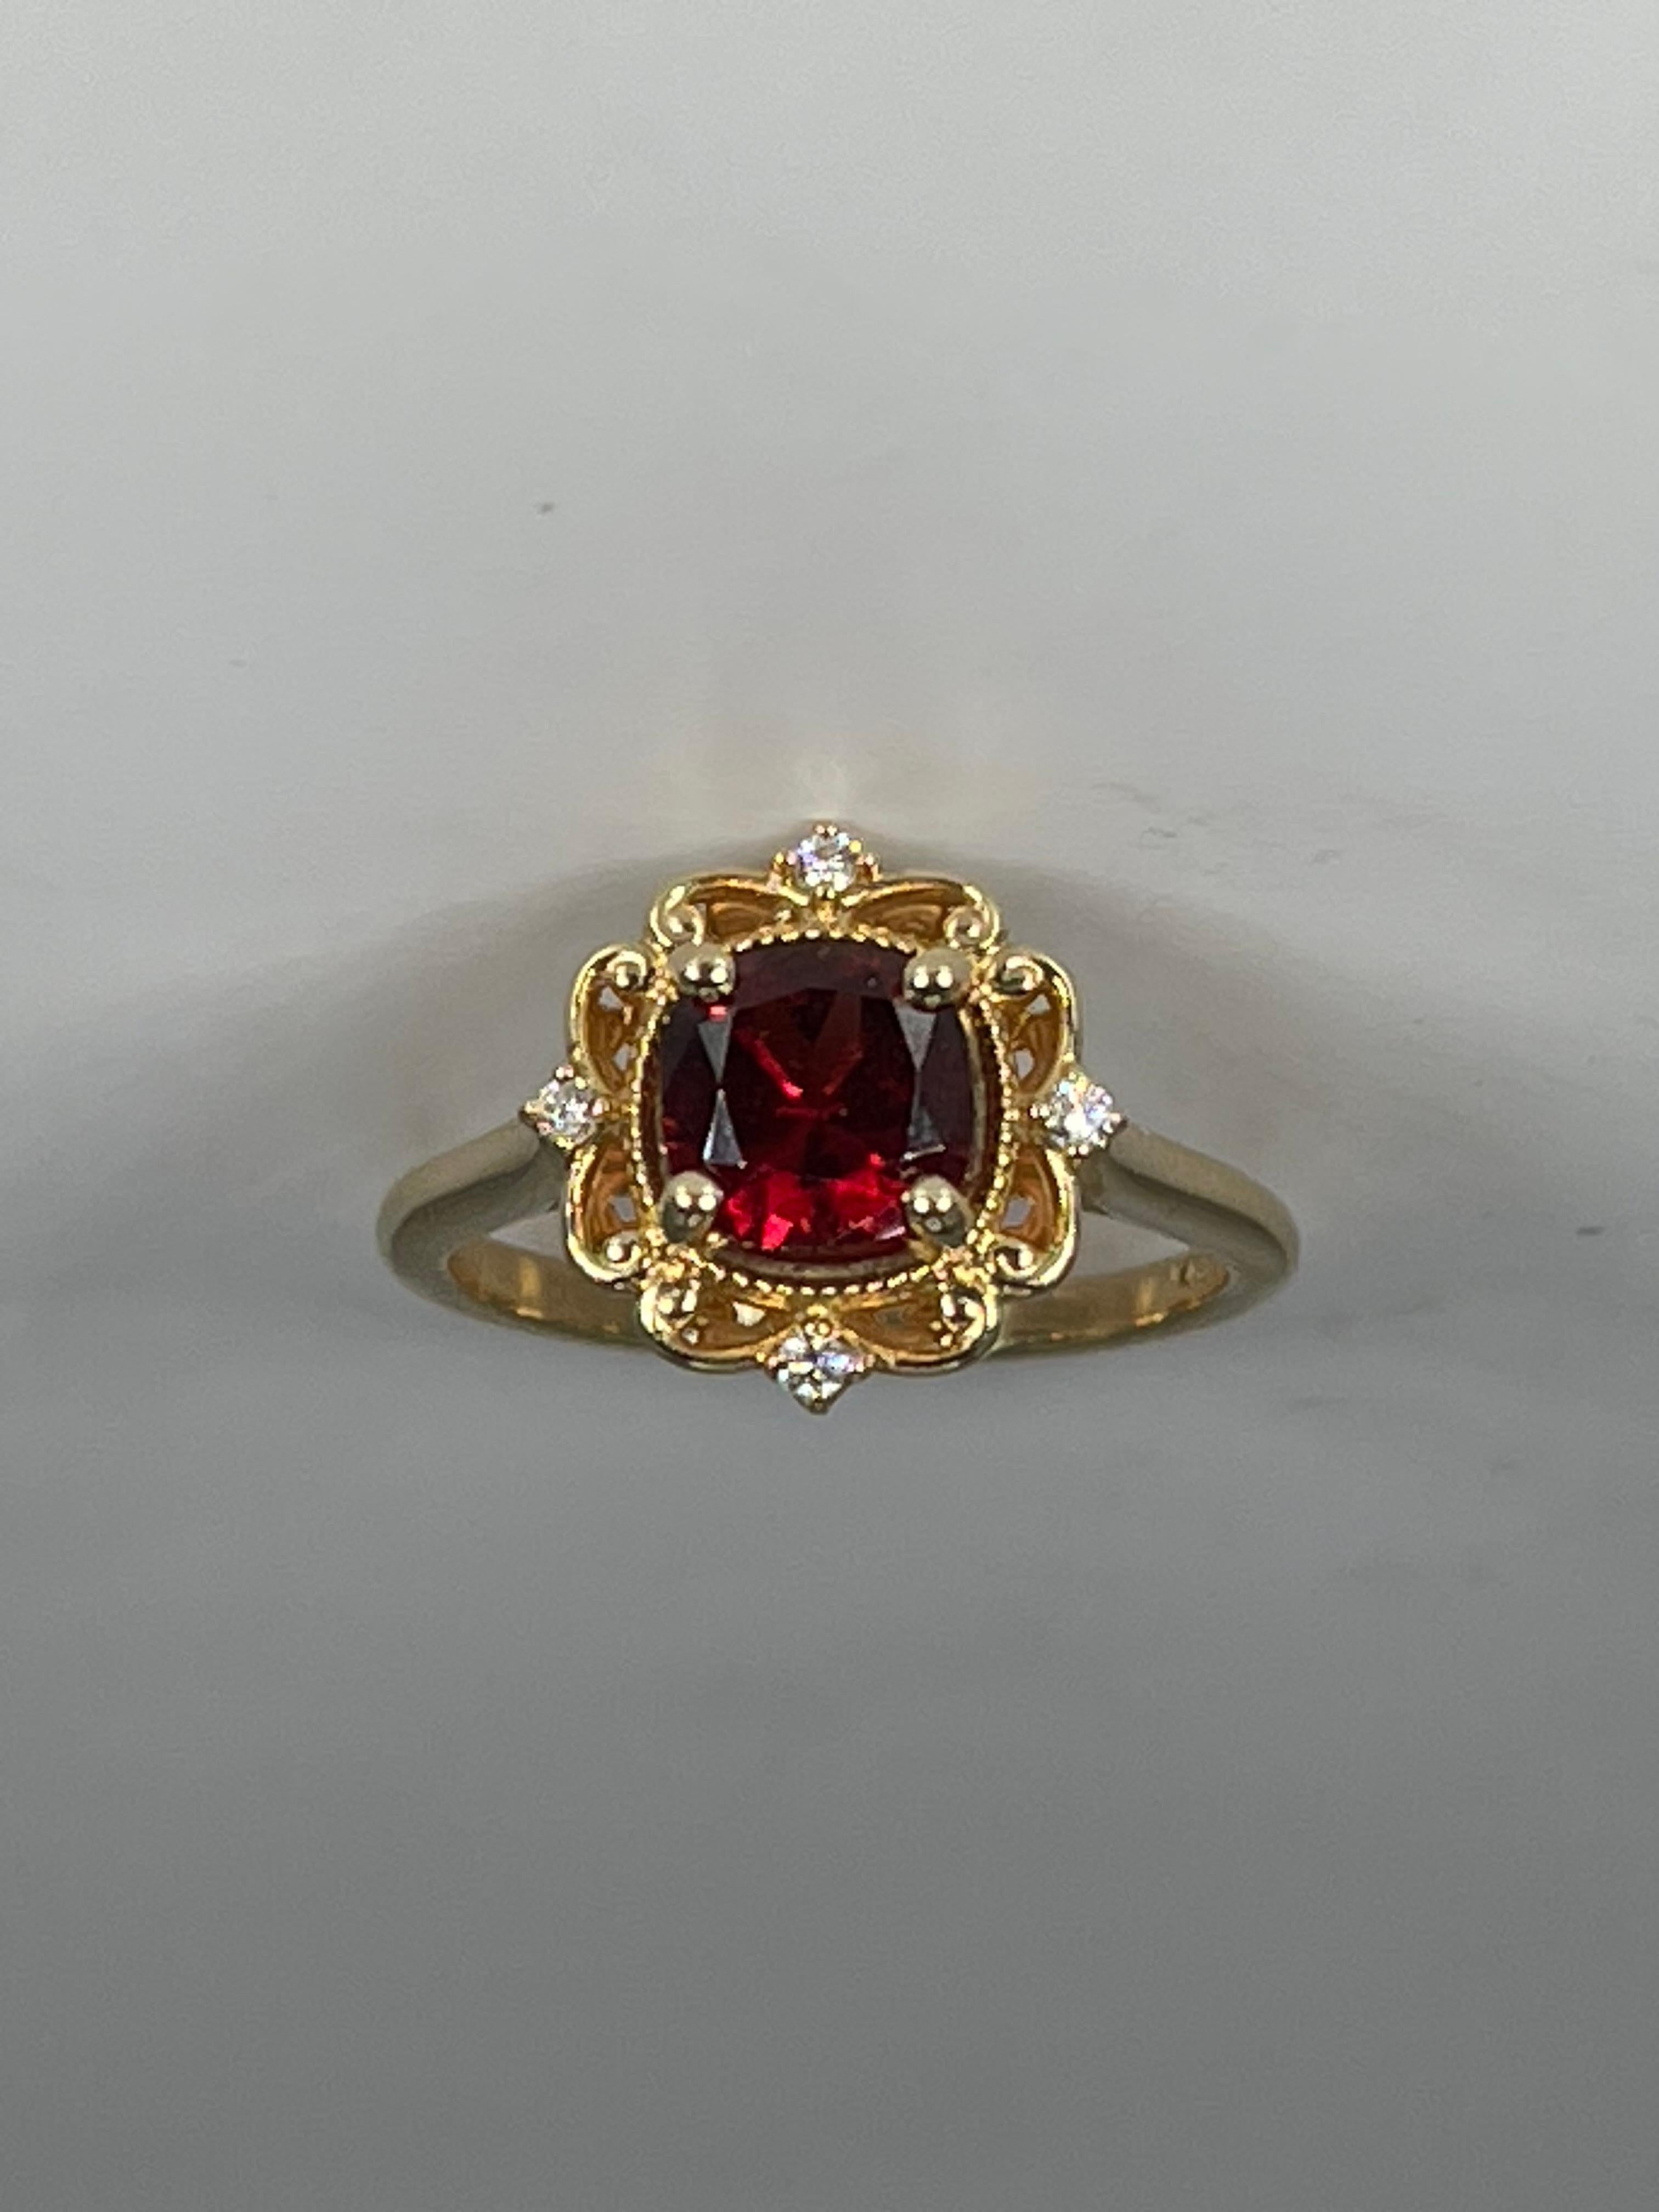 14k yellow gold cushion 1.40 CTW cut spinel with diamonds. The ring has scrolling detail around the gemstone along with 4 diamonds on the top, bottom, and sides of the stone. The stone measures 6.3 x 6.3 and the ring has a total weight of 3.97 grams.